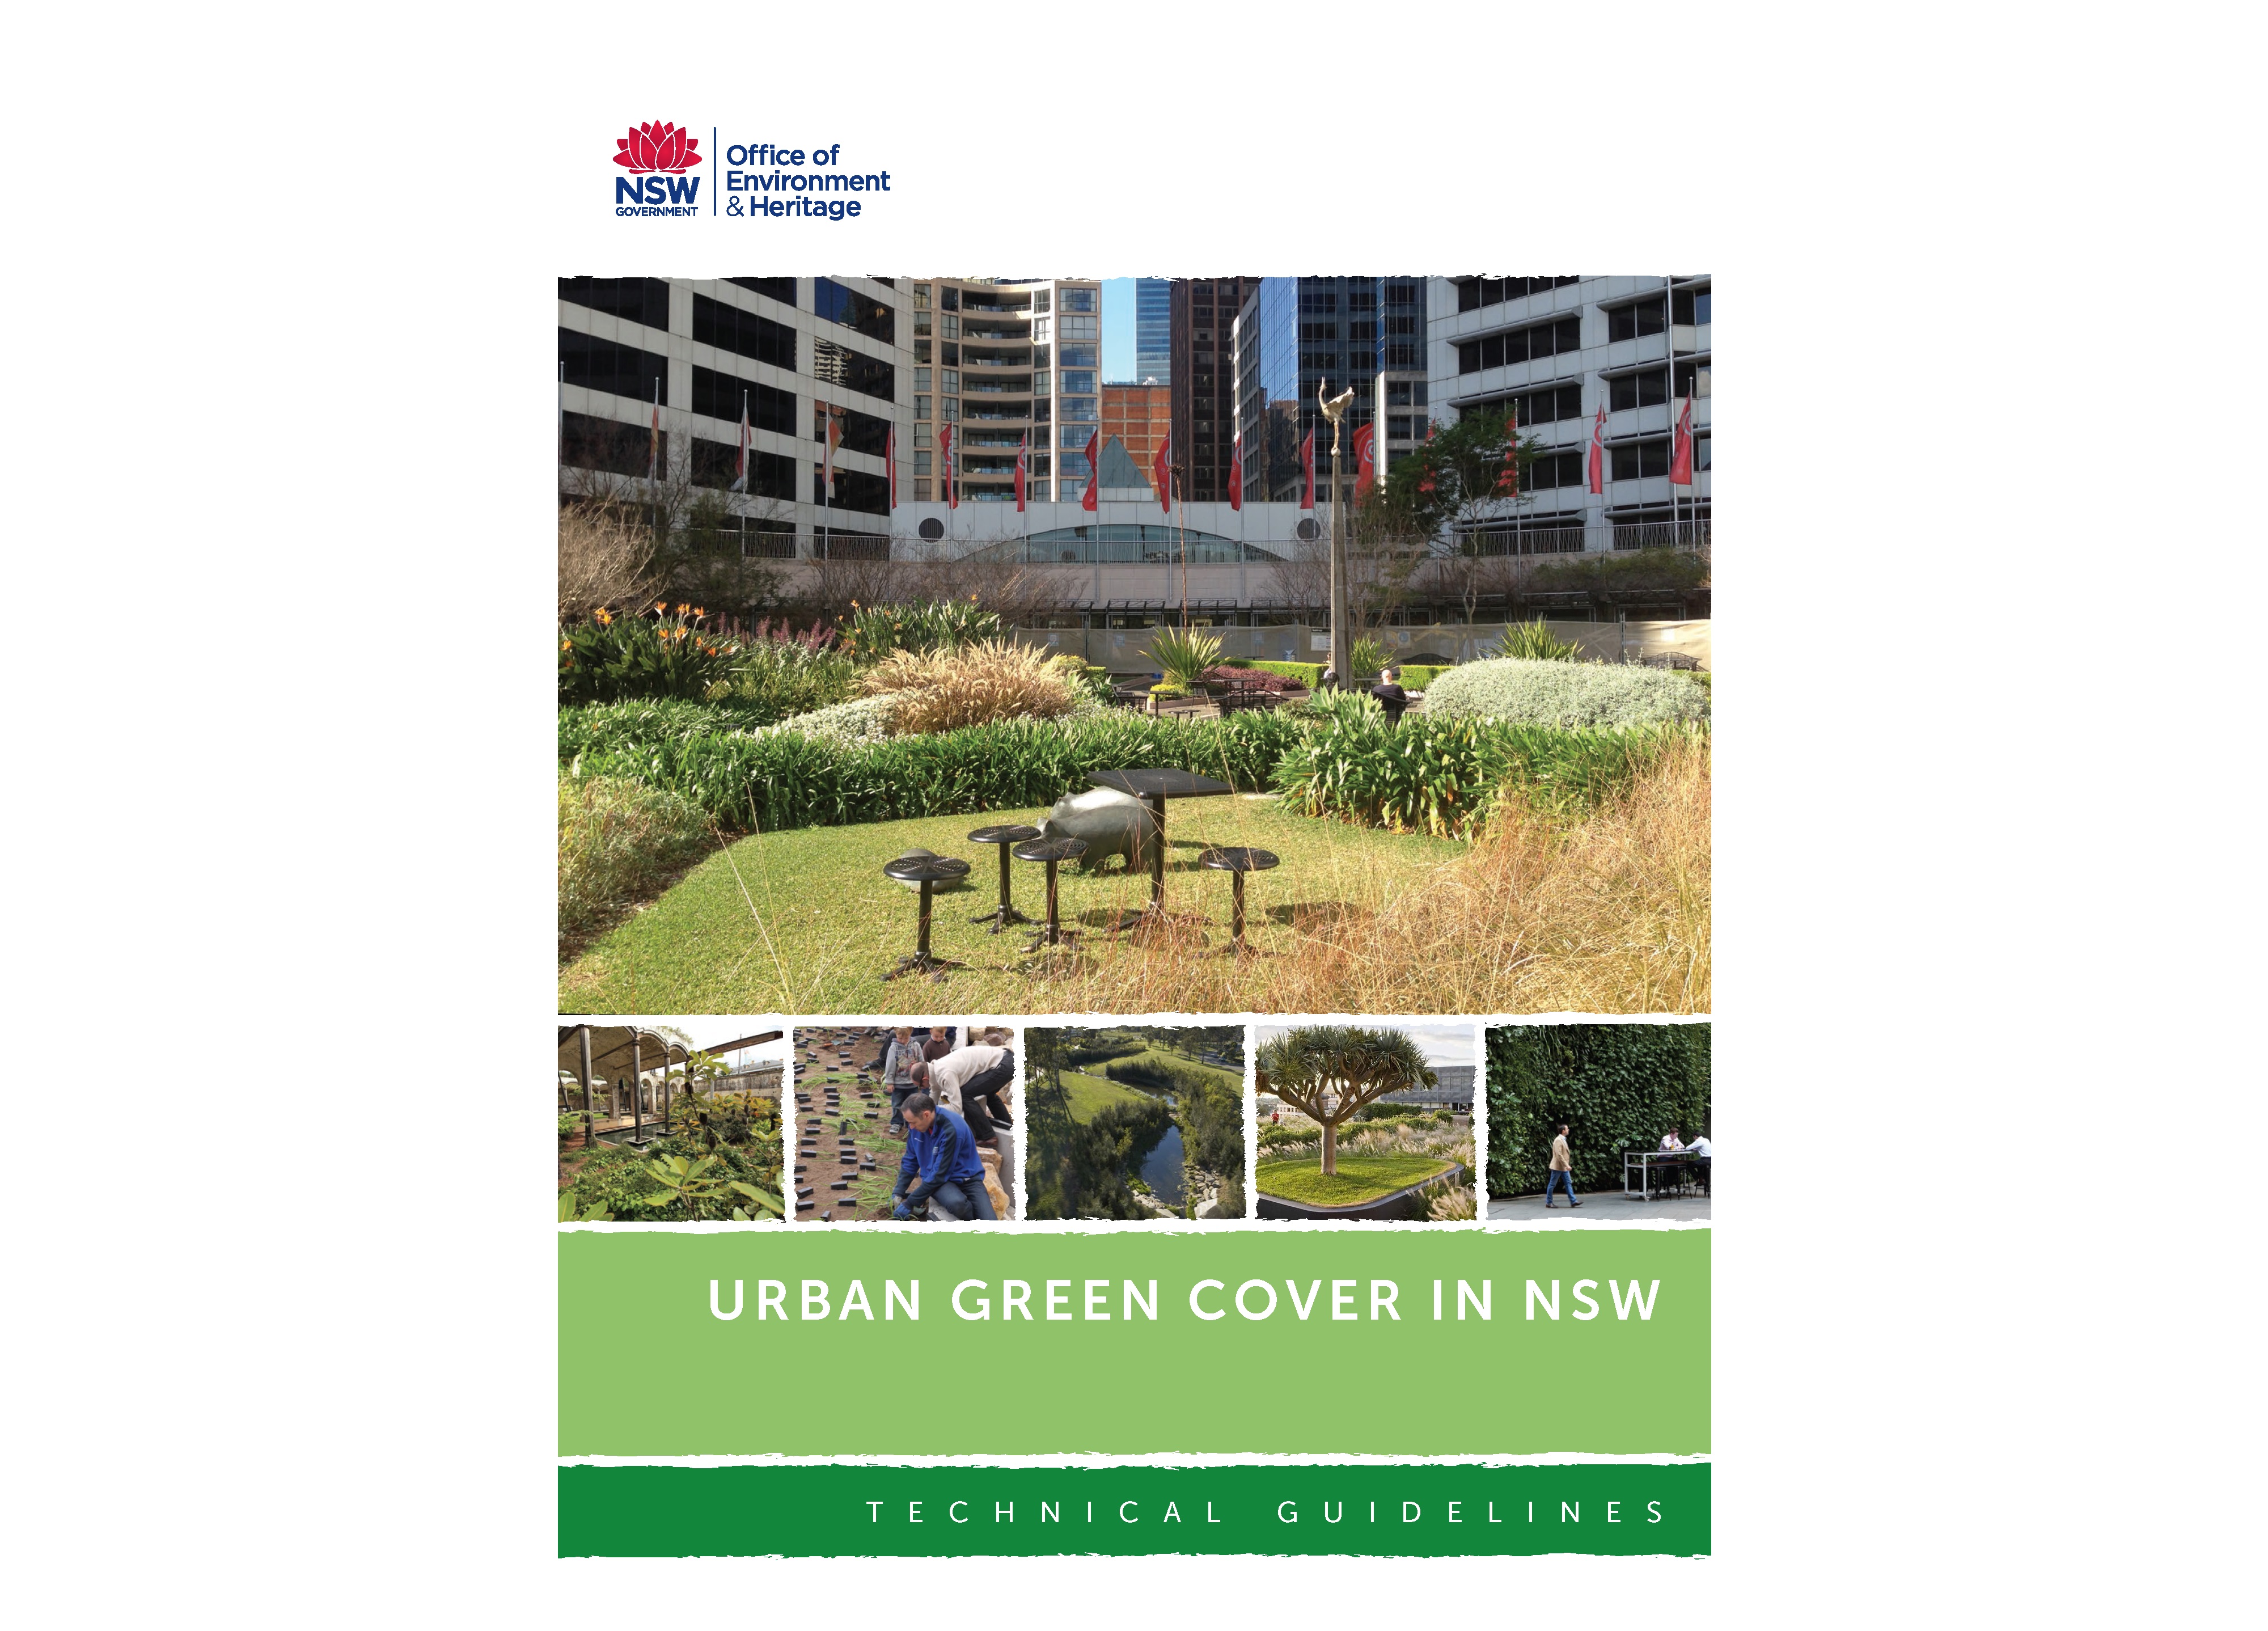 Cover of the Urban Green Cover Technical Guidelines